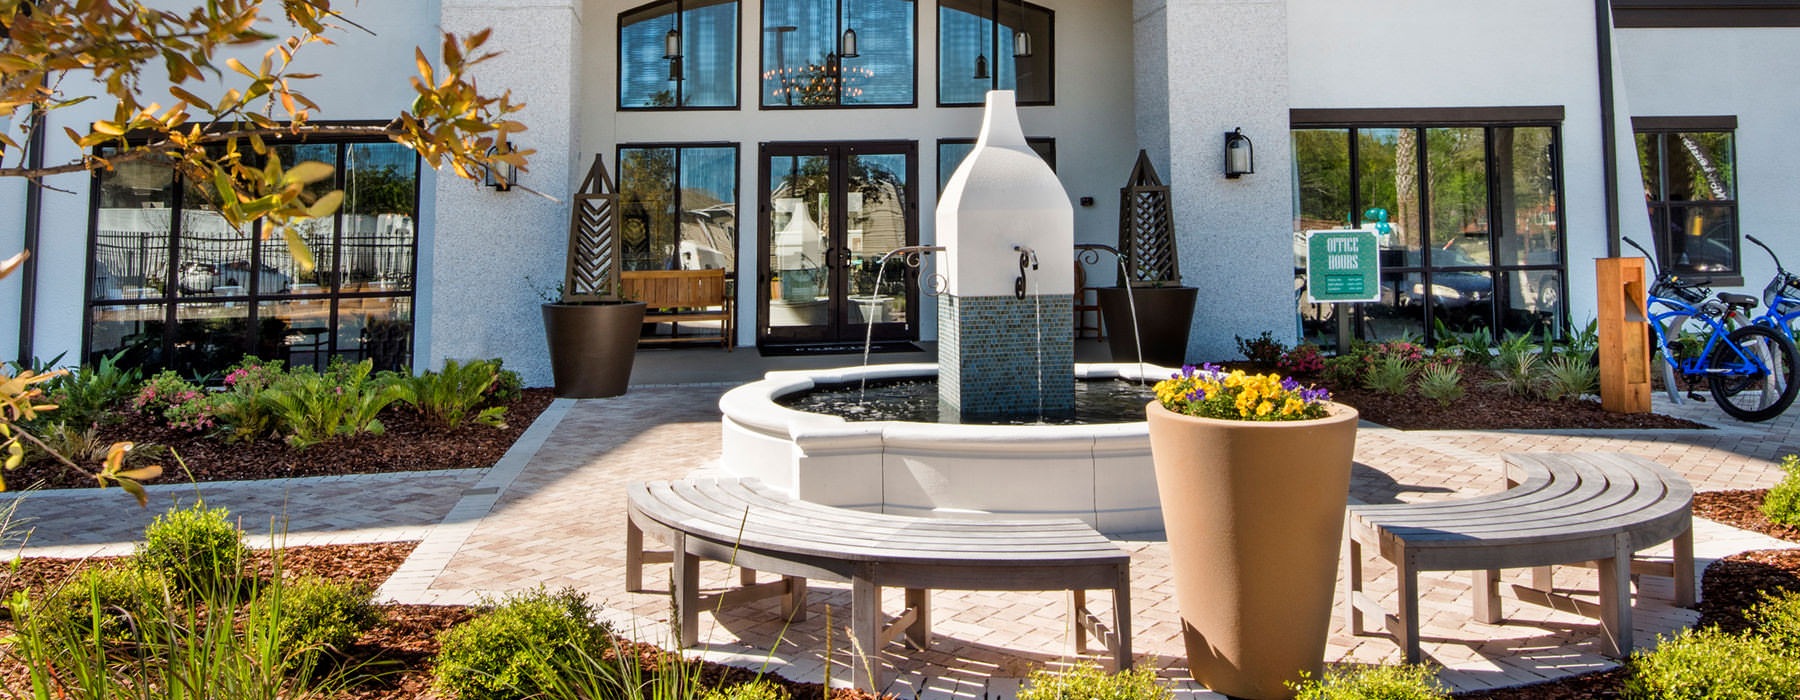 Fountain outside of the entry to Portiva leasing office